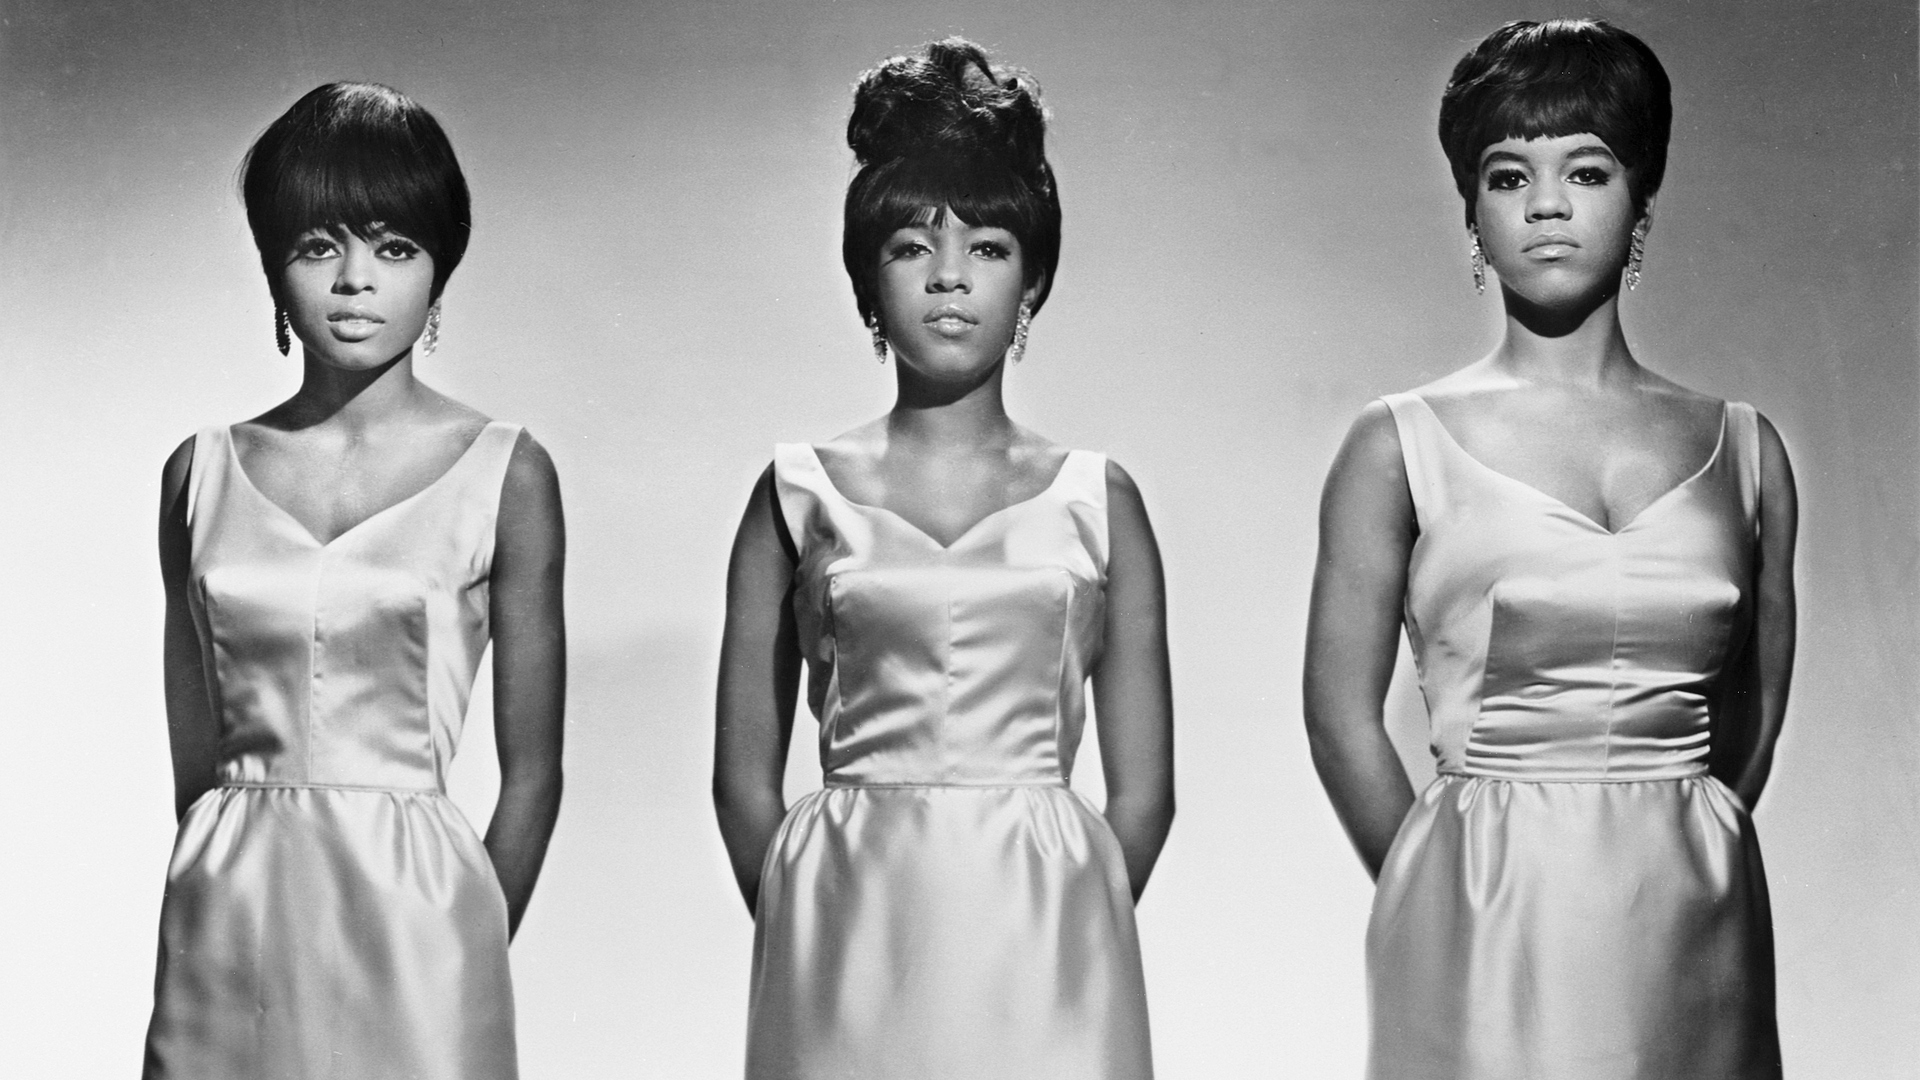 Where Did Our Love Go av ﻿﻿The Supremes